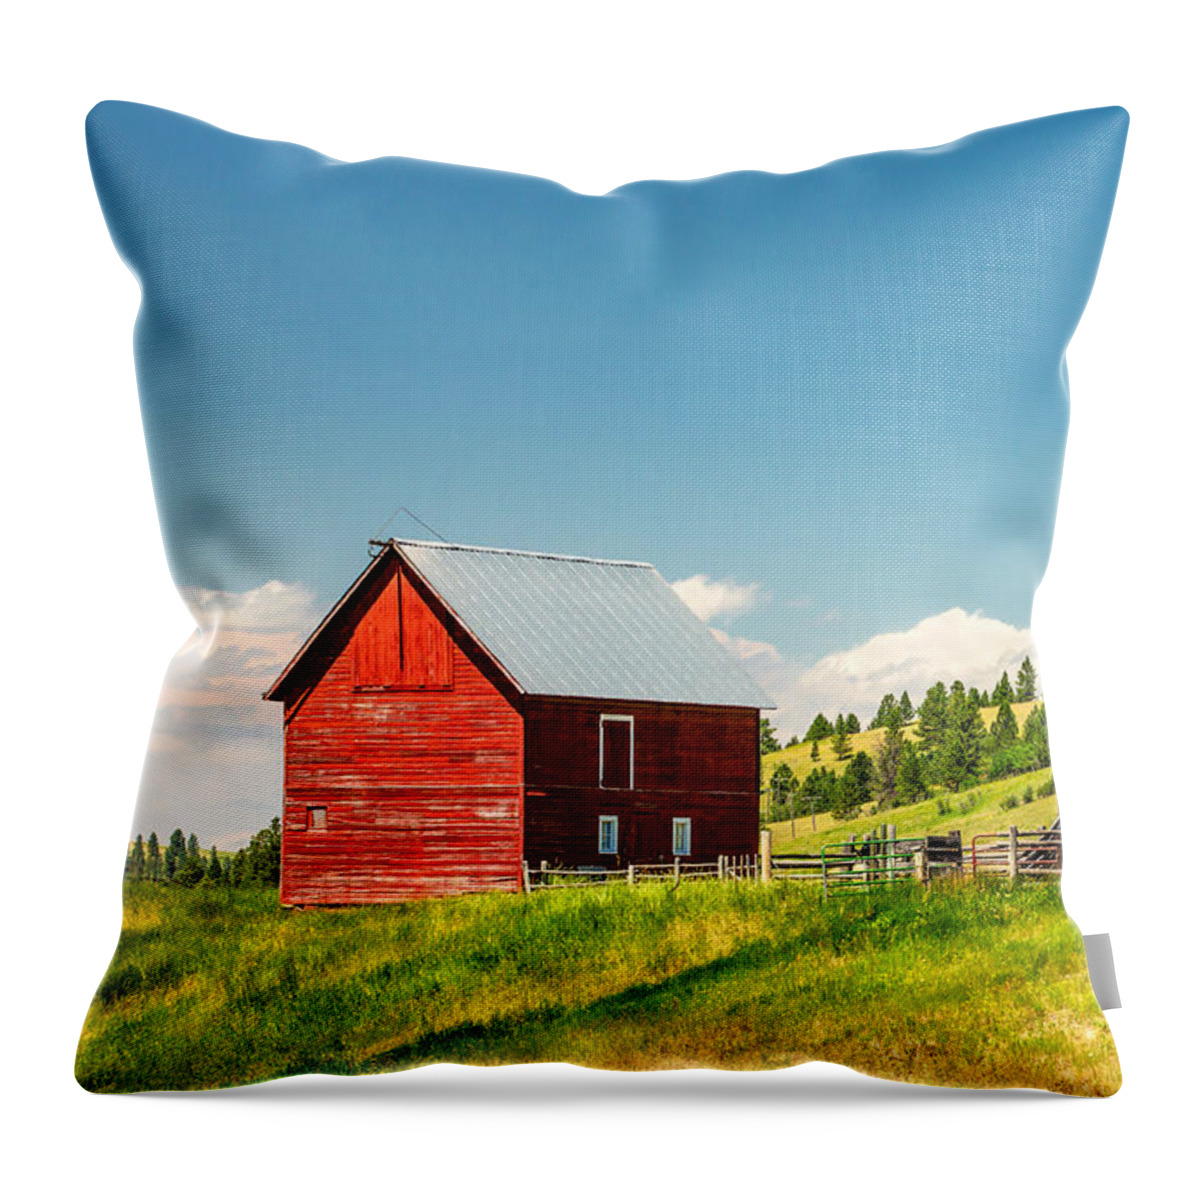 Red Throw Pillow featuring the photograph Small Red Shed by Todd Klassy